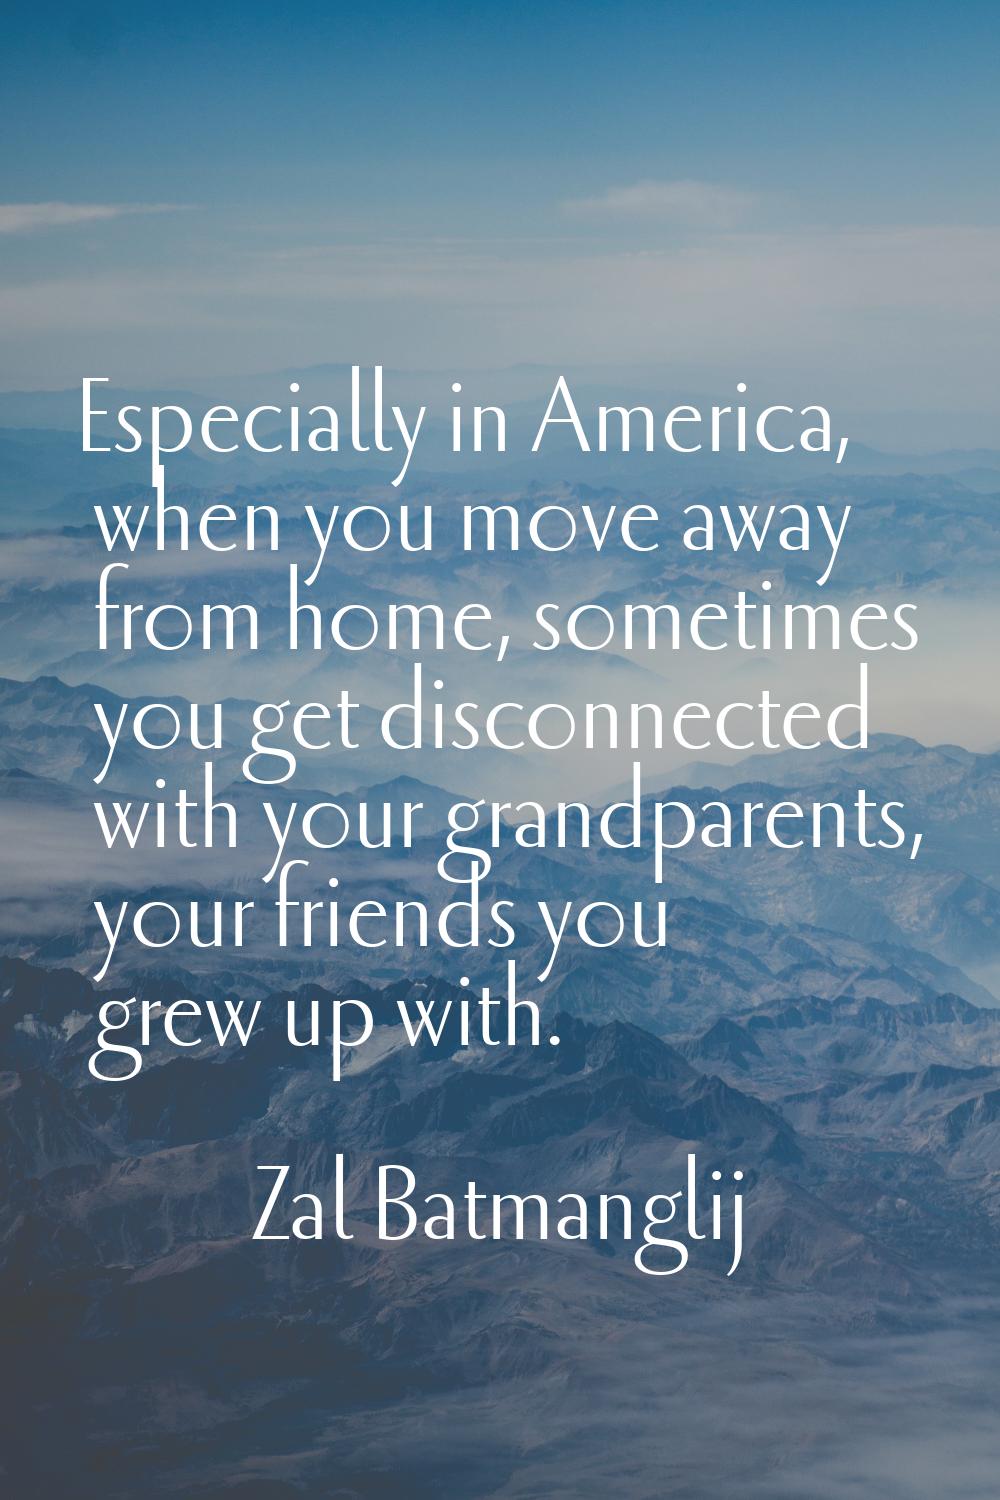 Especially in America, when you move away from home, sometimes you get disconnected with your grand